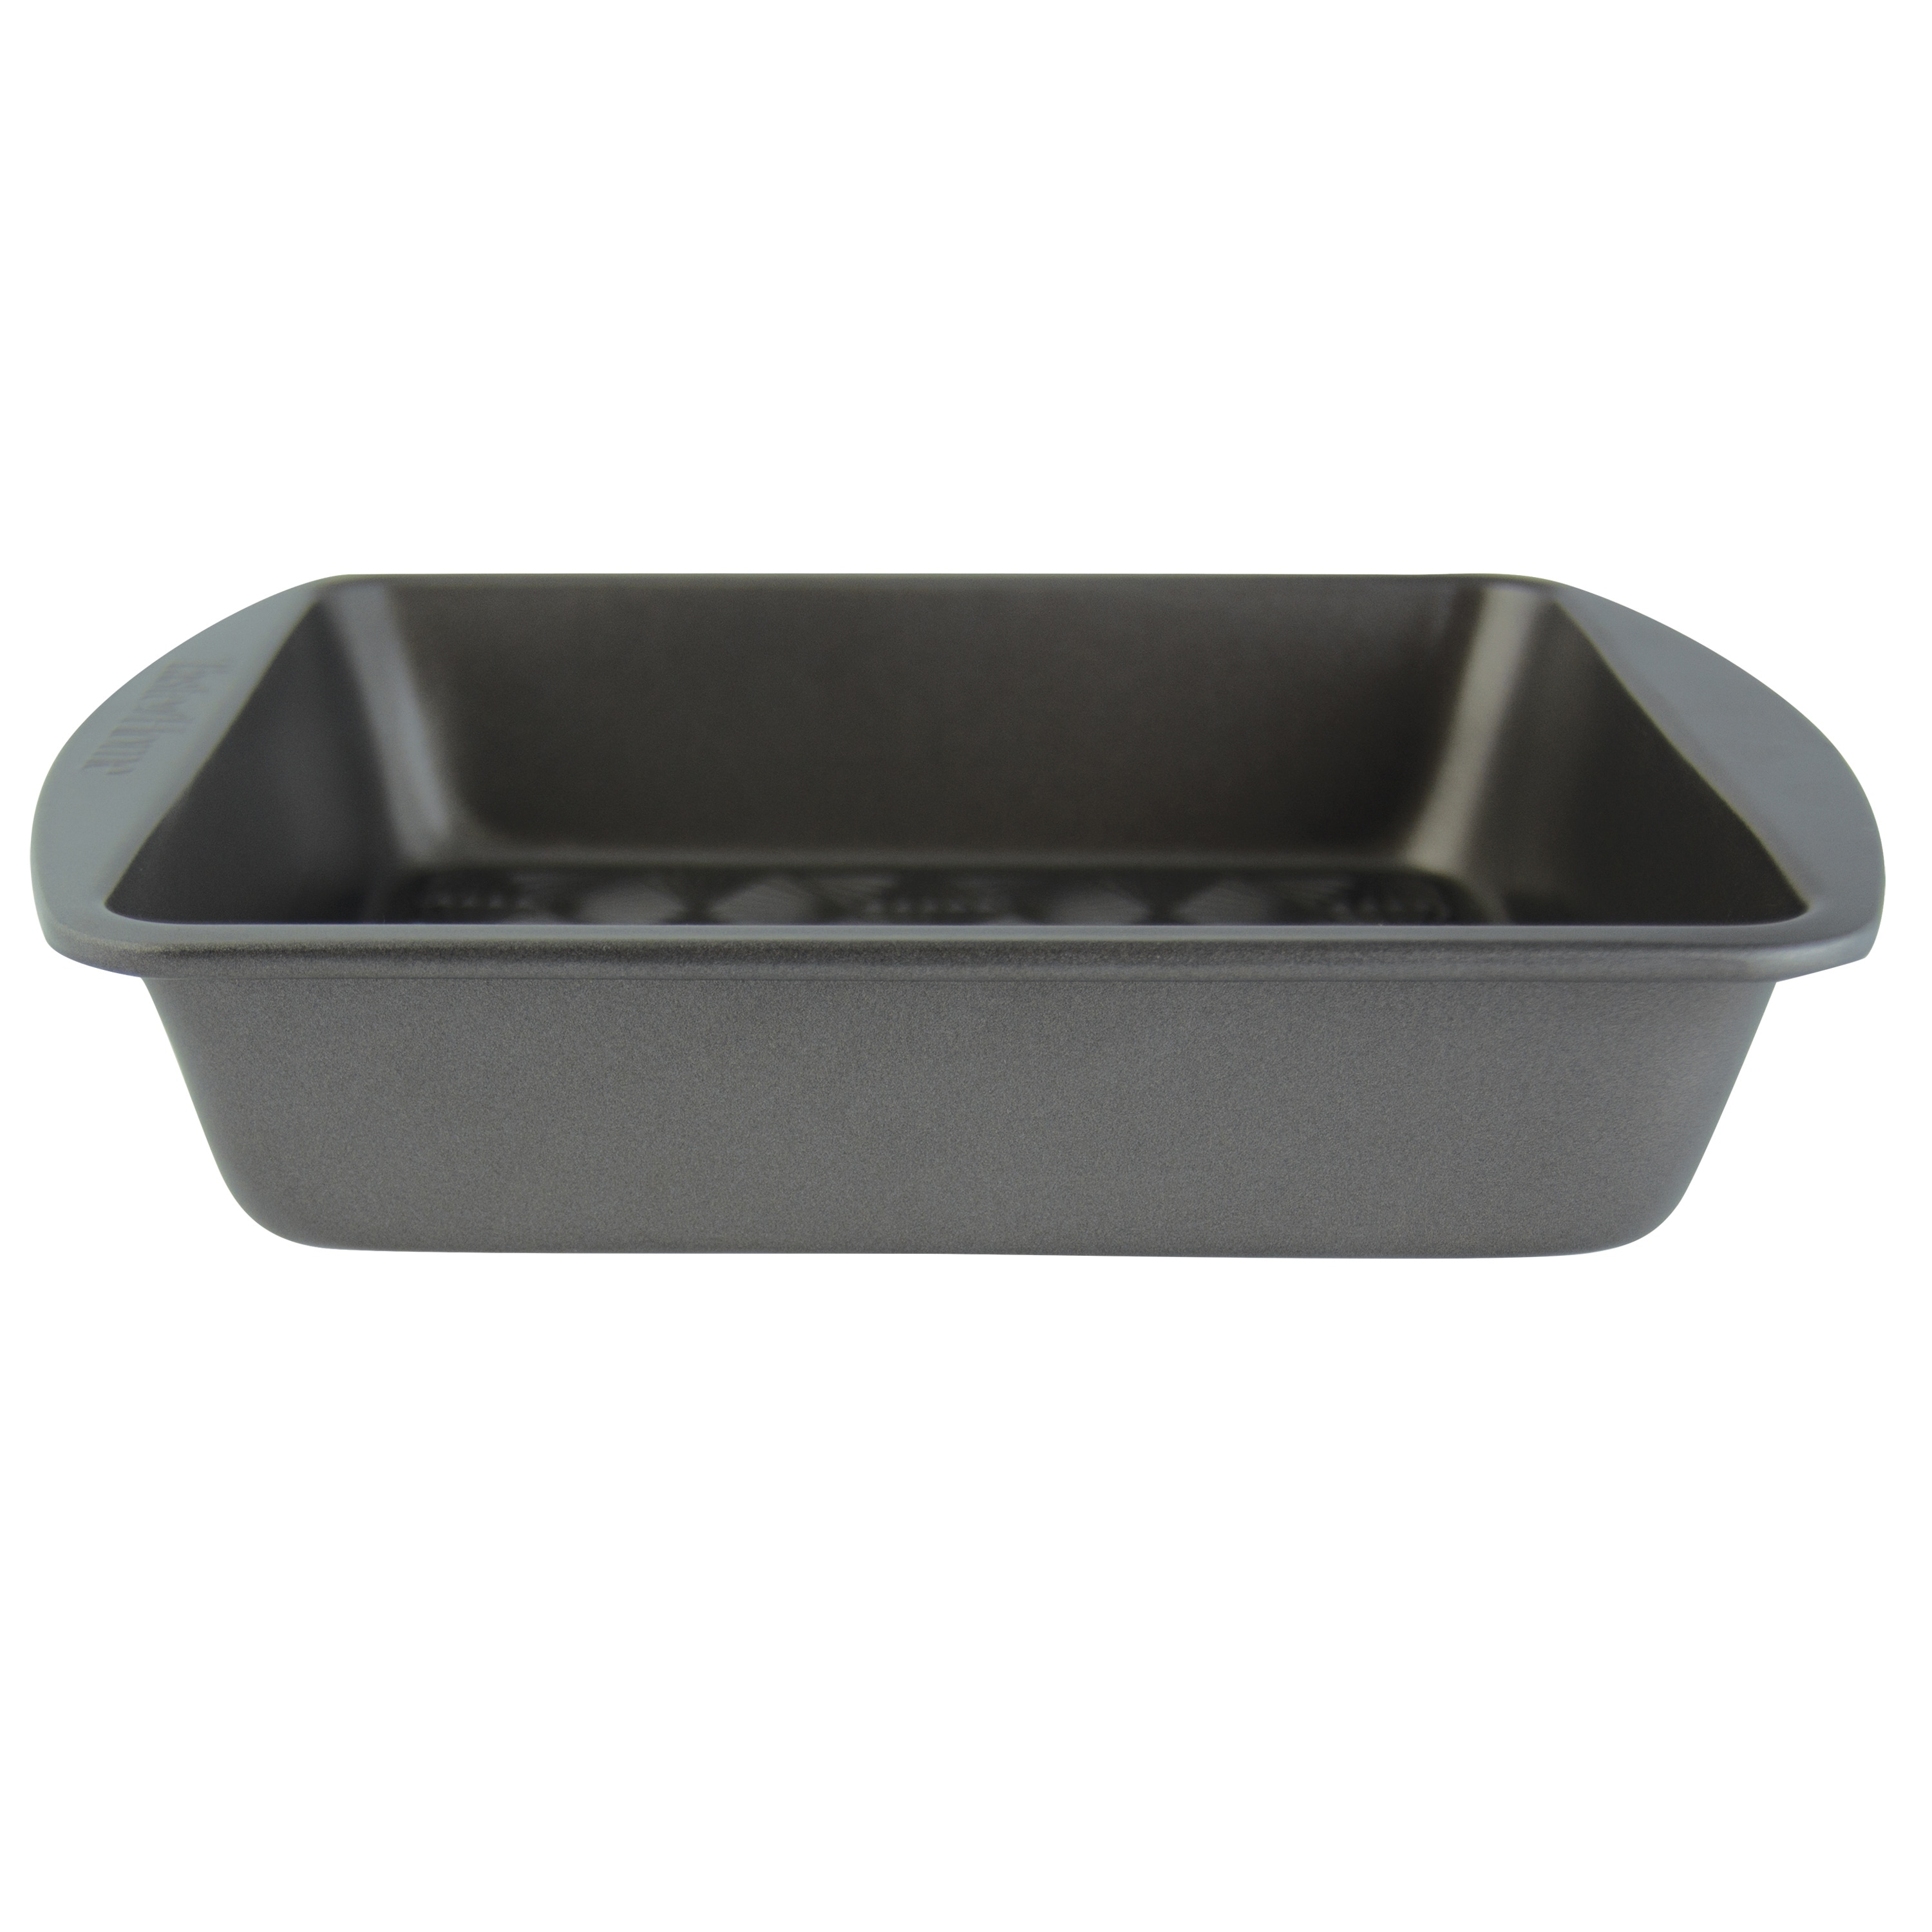 Berghoff Balance Non-stick Carbon Steel 12-cup Muffin Pan 3.25